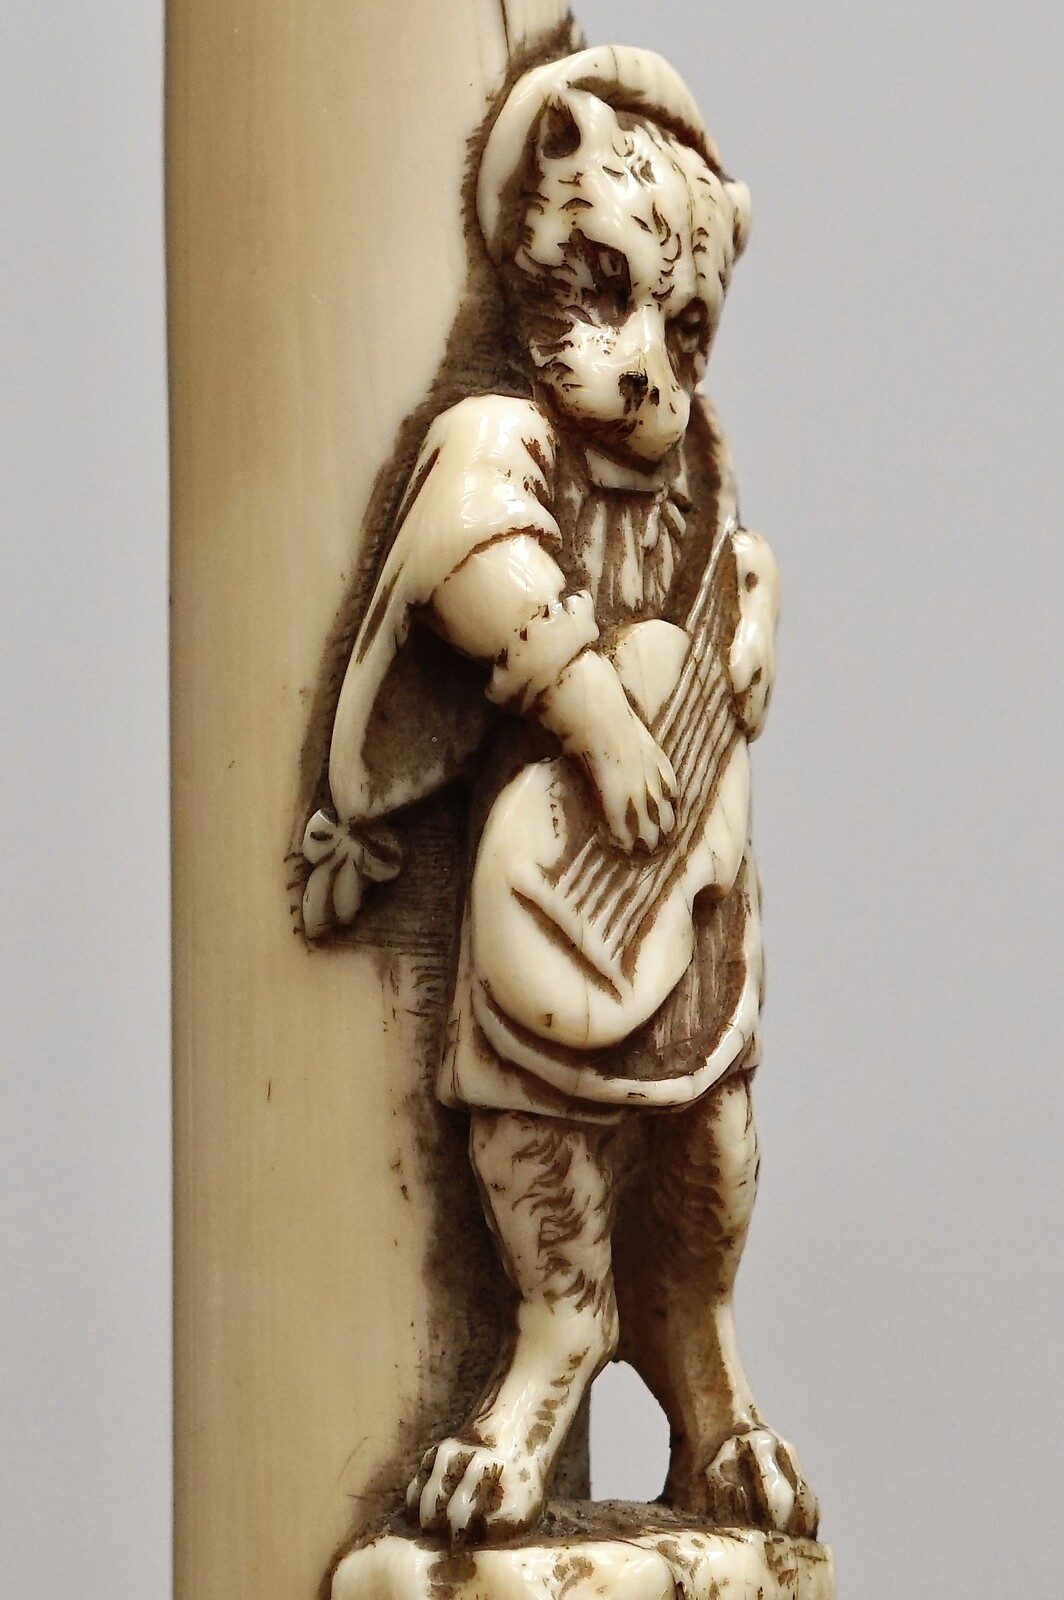 Troubadour cat, character of The Reynard the fox fables. Germany, ca. 1880